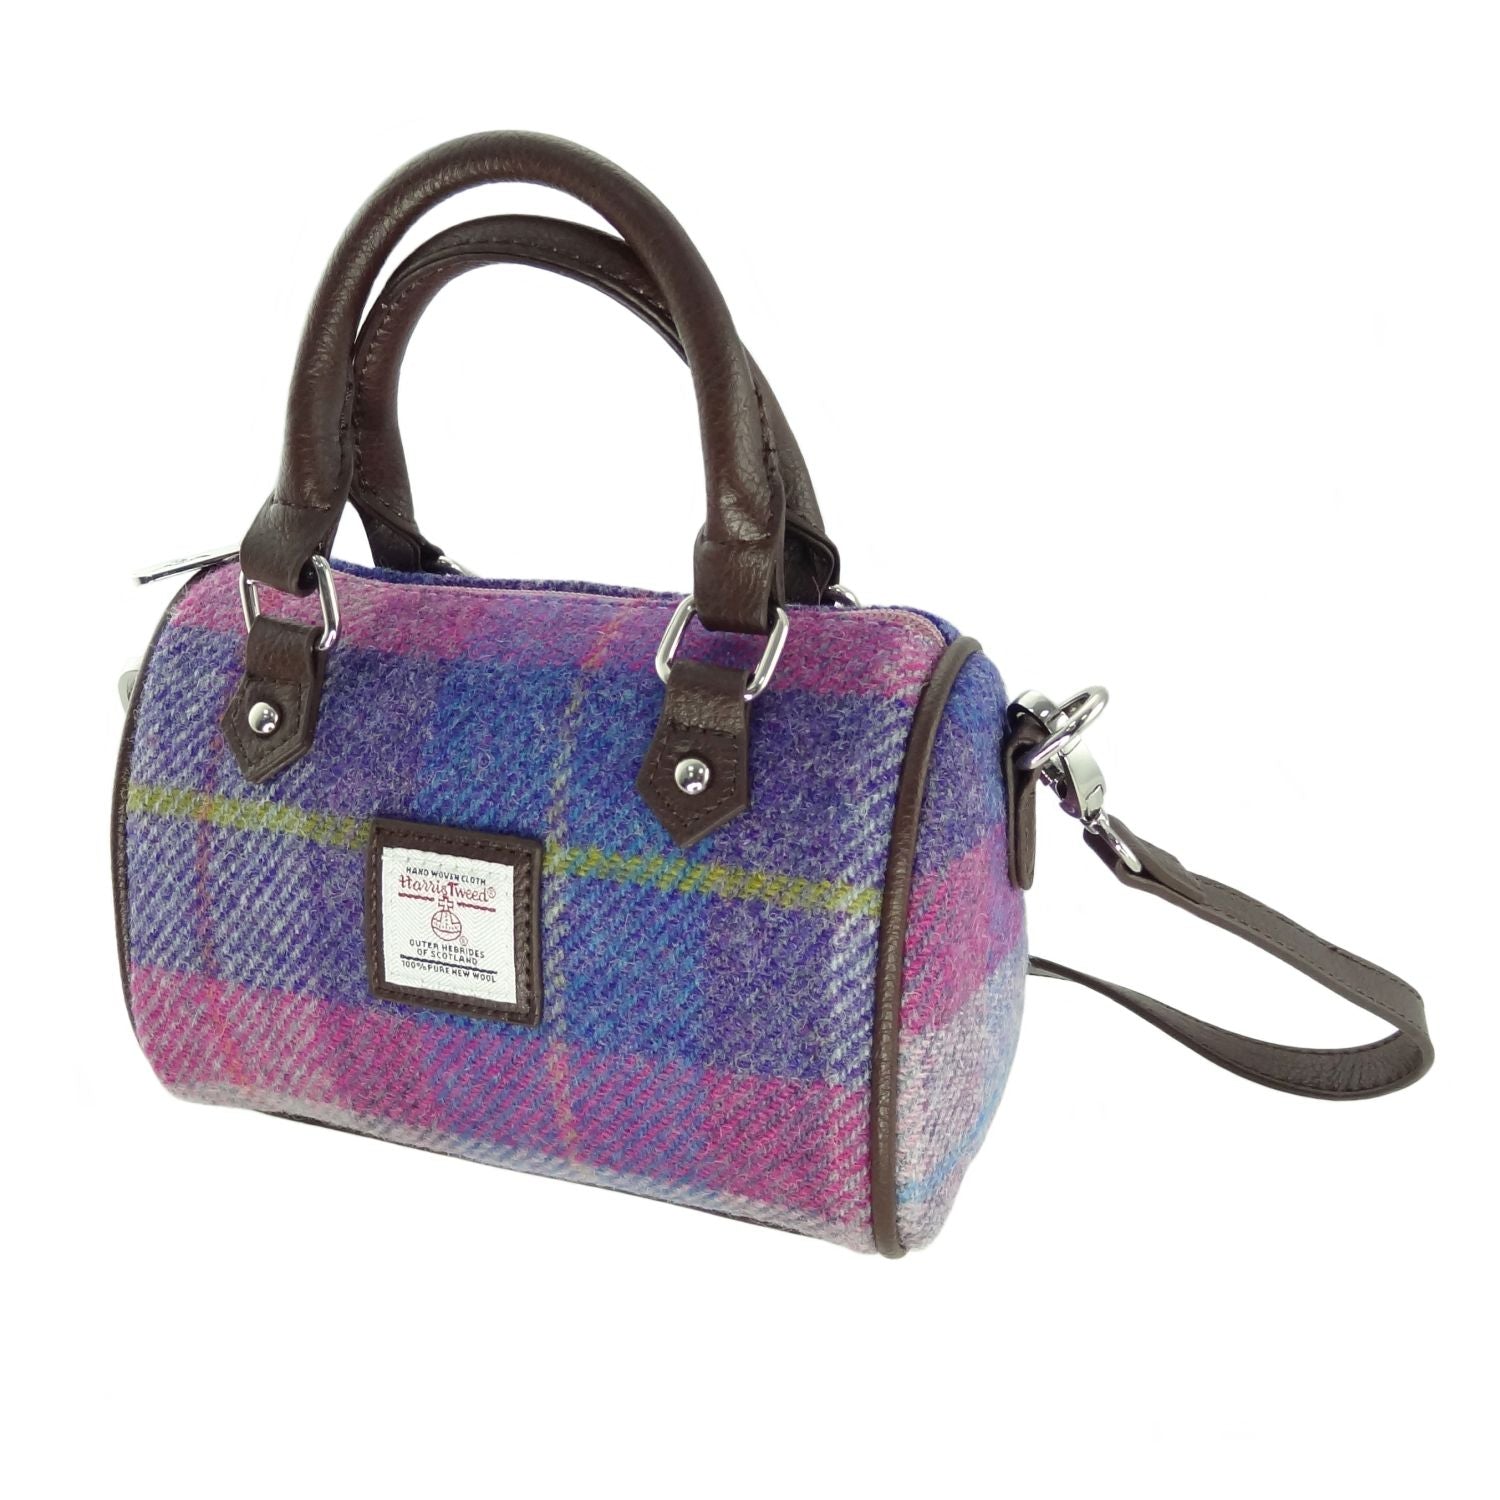 Harris Tweed Mini Bowling Bag  10% Off Your First Order at Real